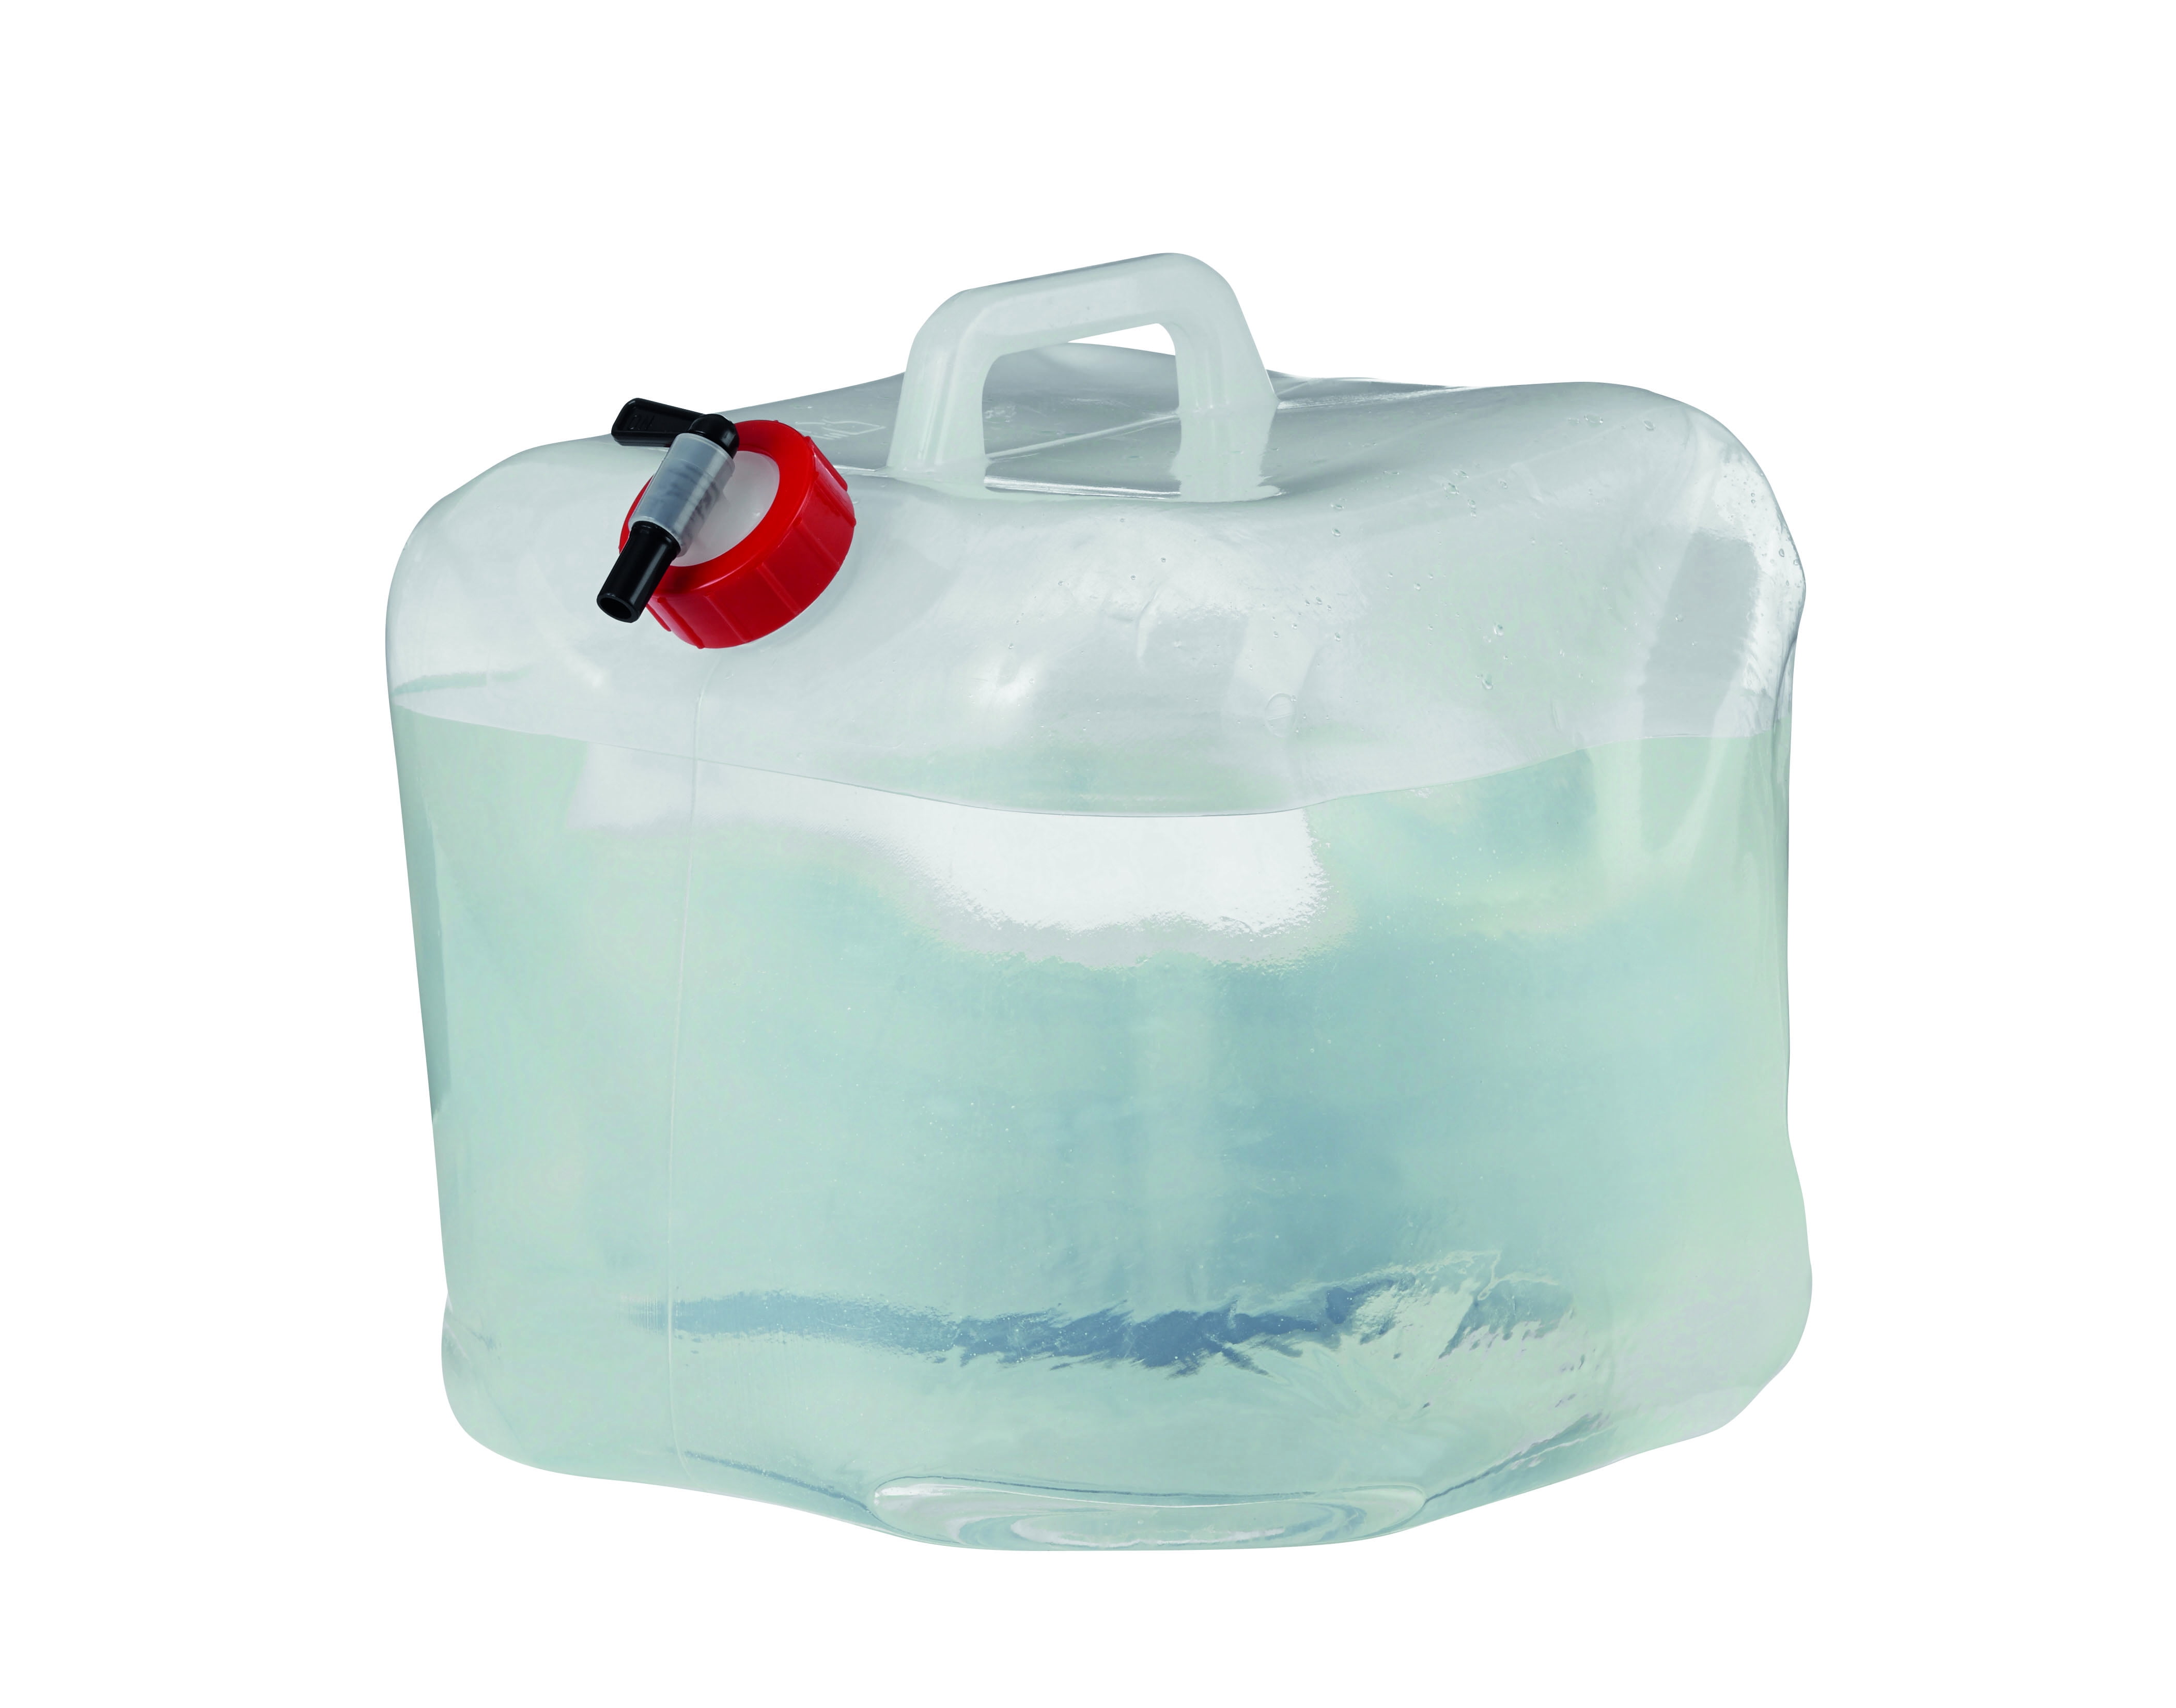 jerry can water carriers  25 litre 20 litre 10 litre 5 litre new bpa free 4 size 